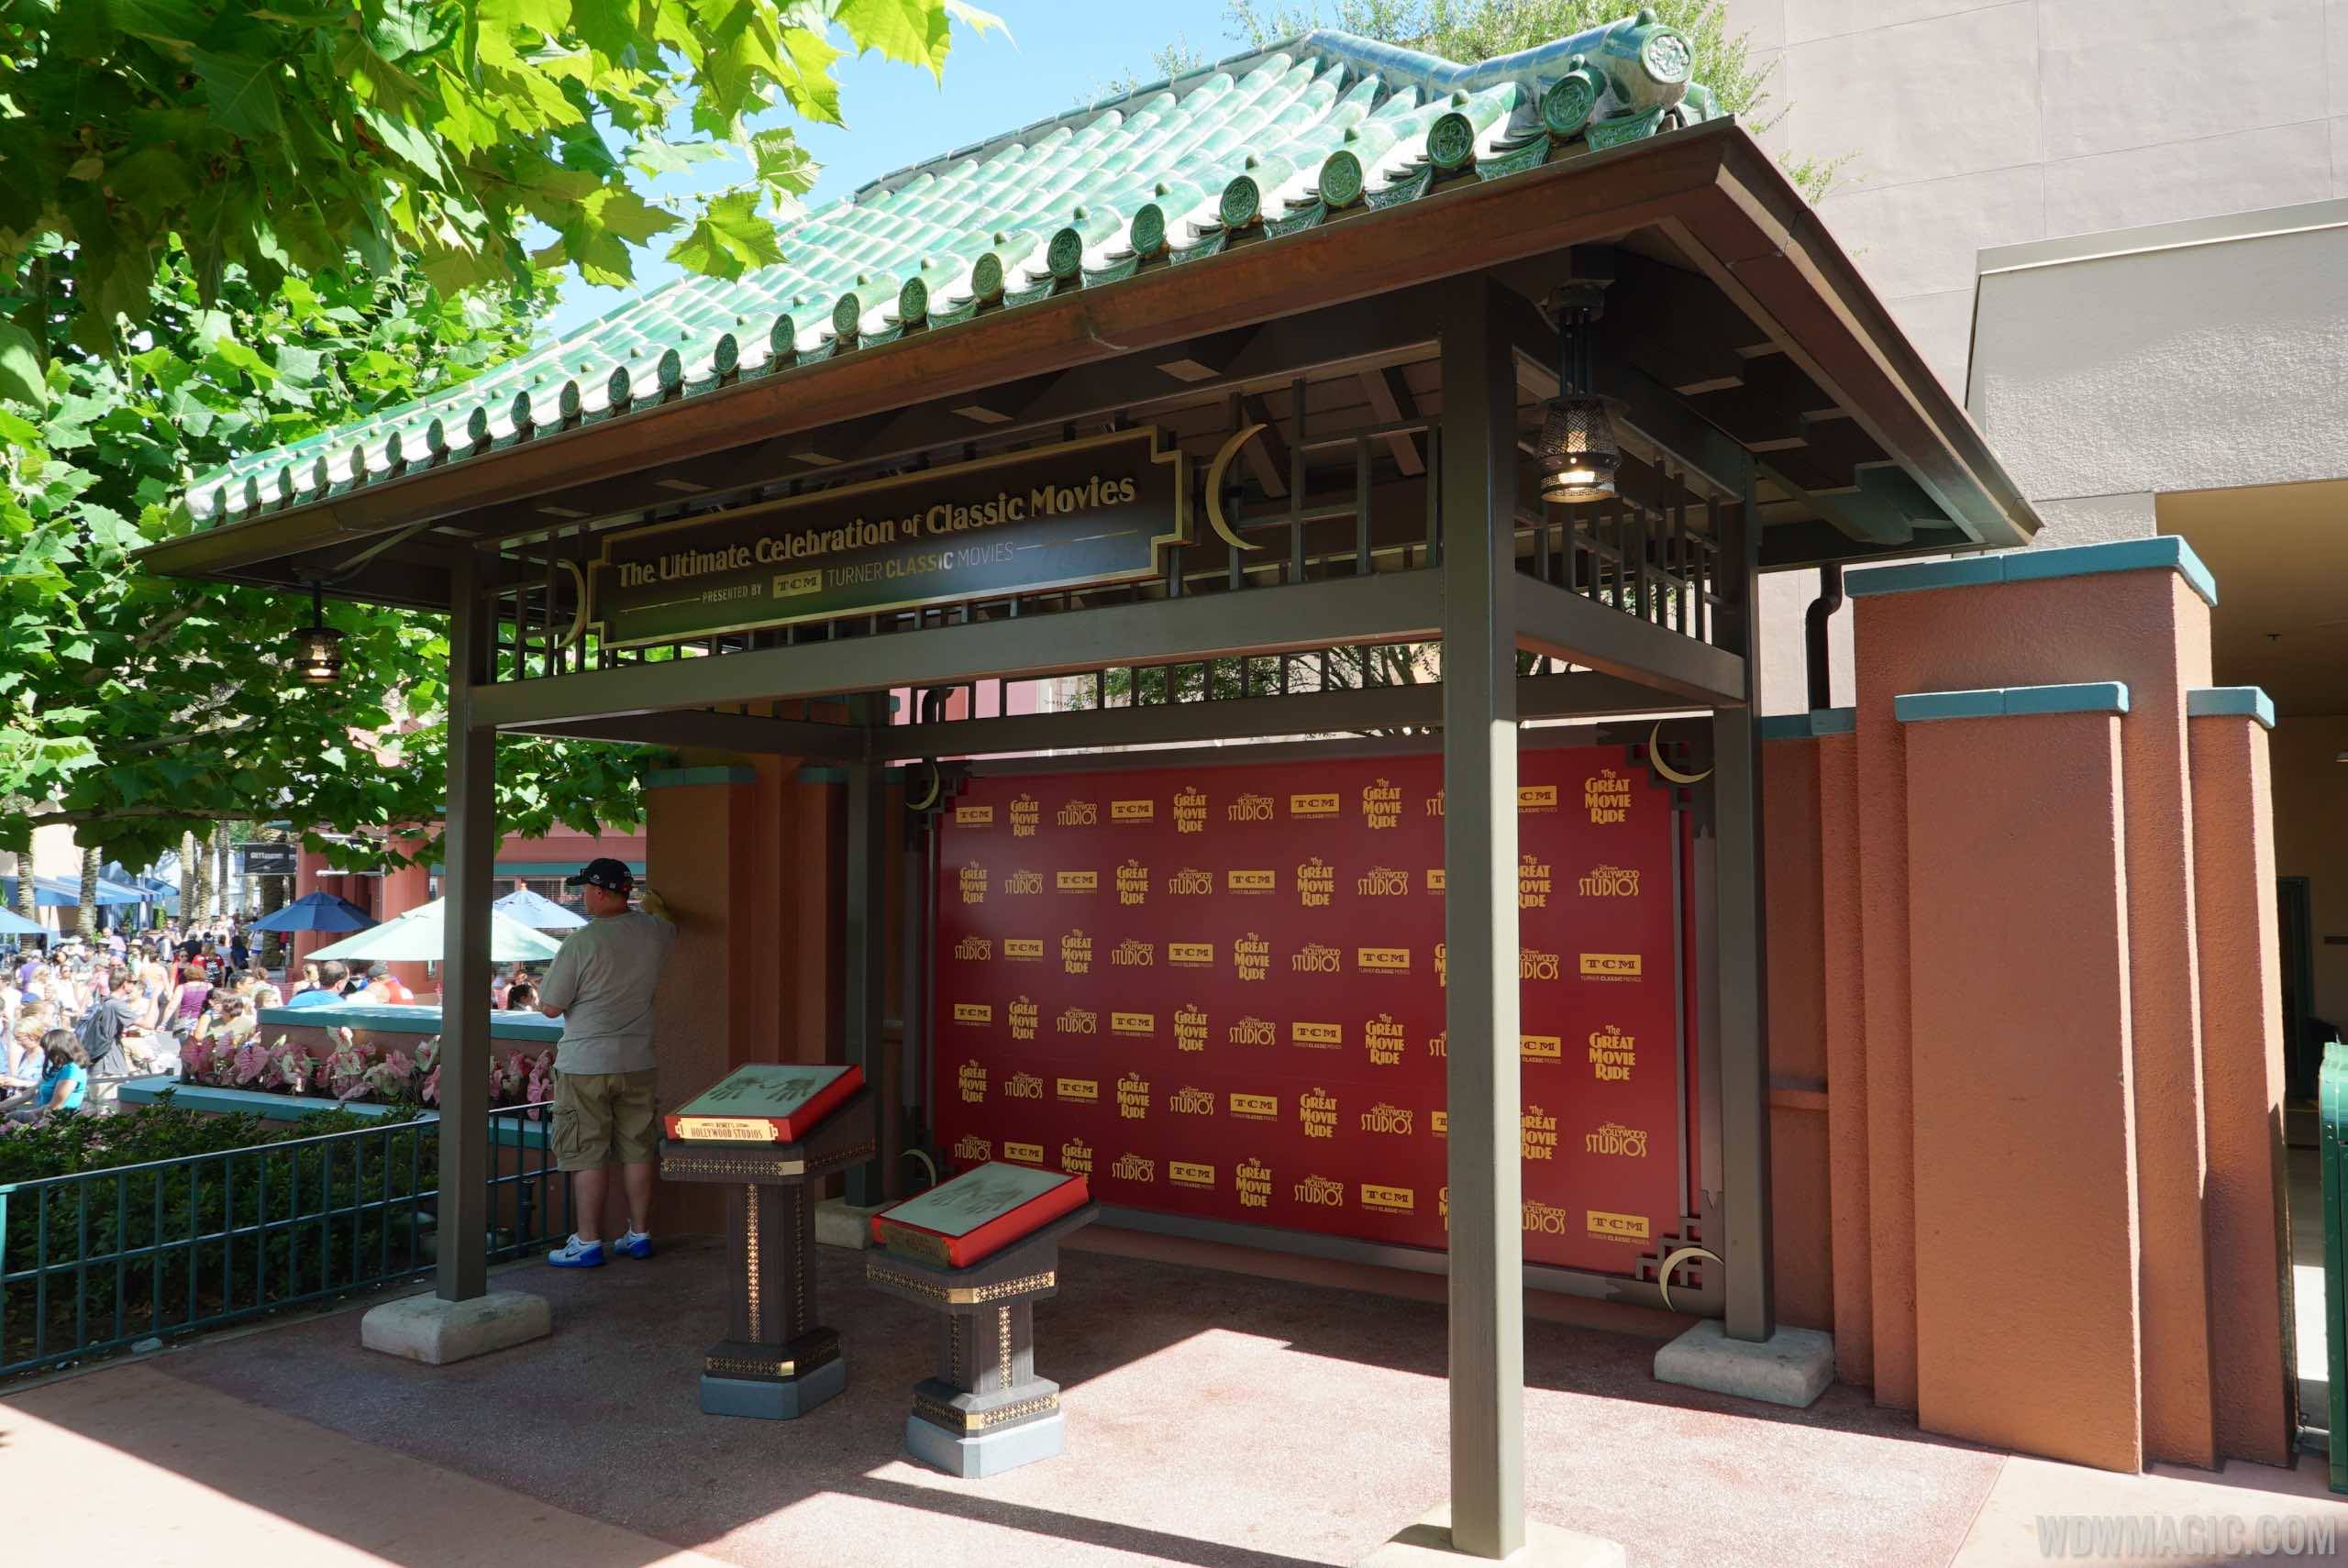 The Great Movie Ride TCM updates - Photo opportunity at exit